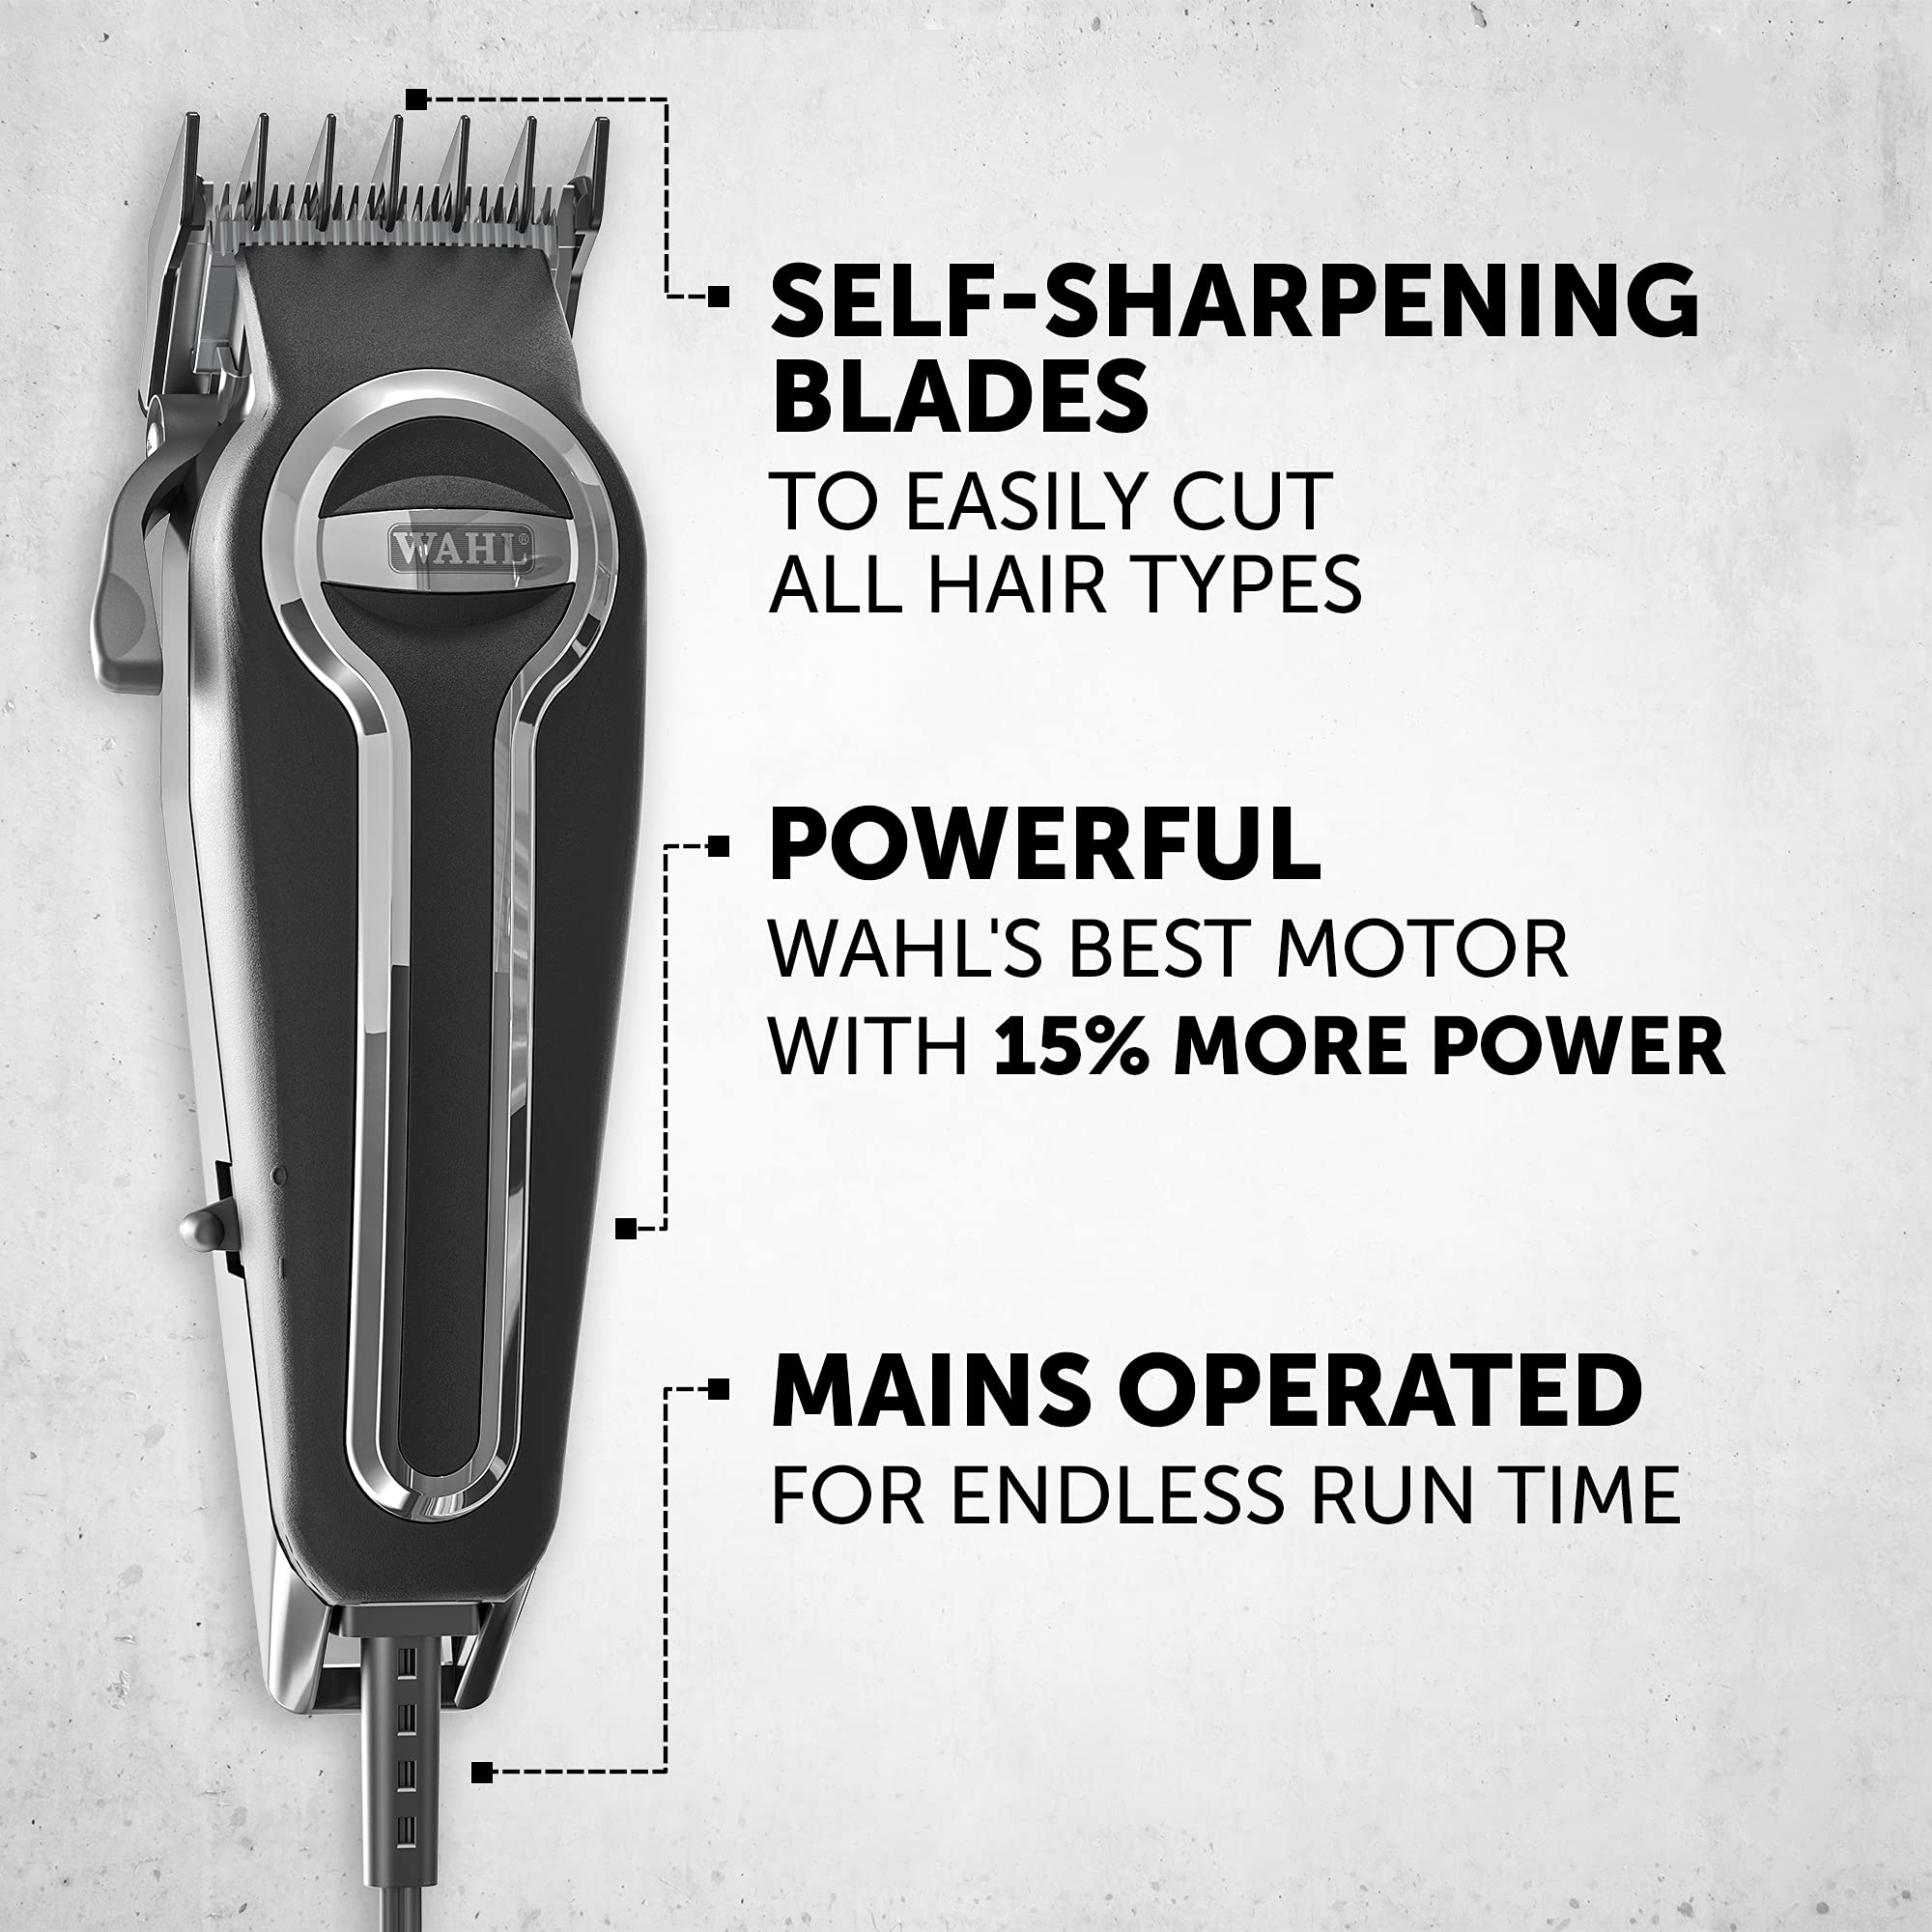 WAHL Elite Pro Hair Cutting Kit, Corded Hair Clipper For Men, Head Shaver, Self Sharpening Precision Blades With Taper Lever, Powerful And Durable Motor, Secure-Fit Premium Guide Combs, 79602-300